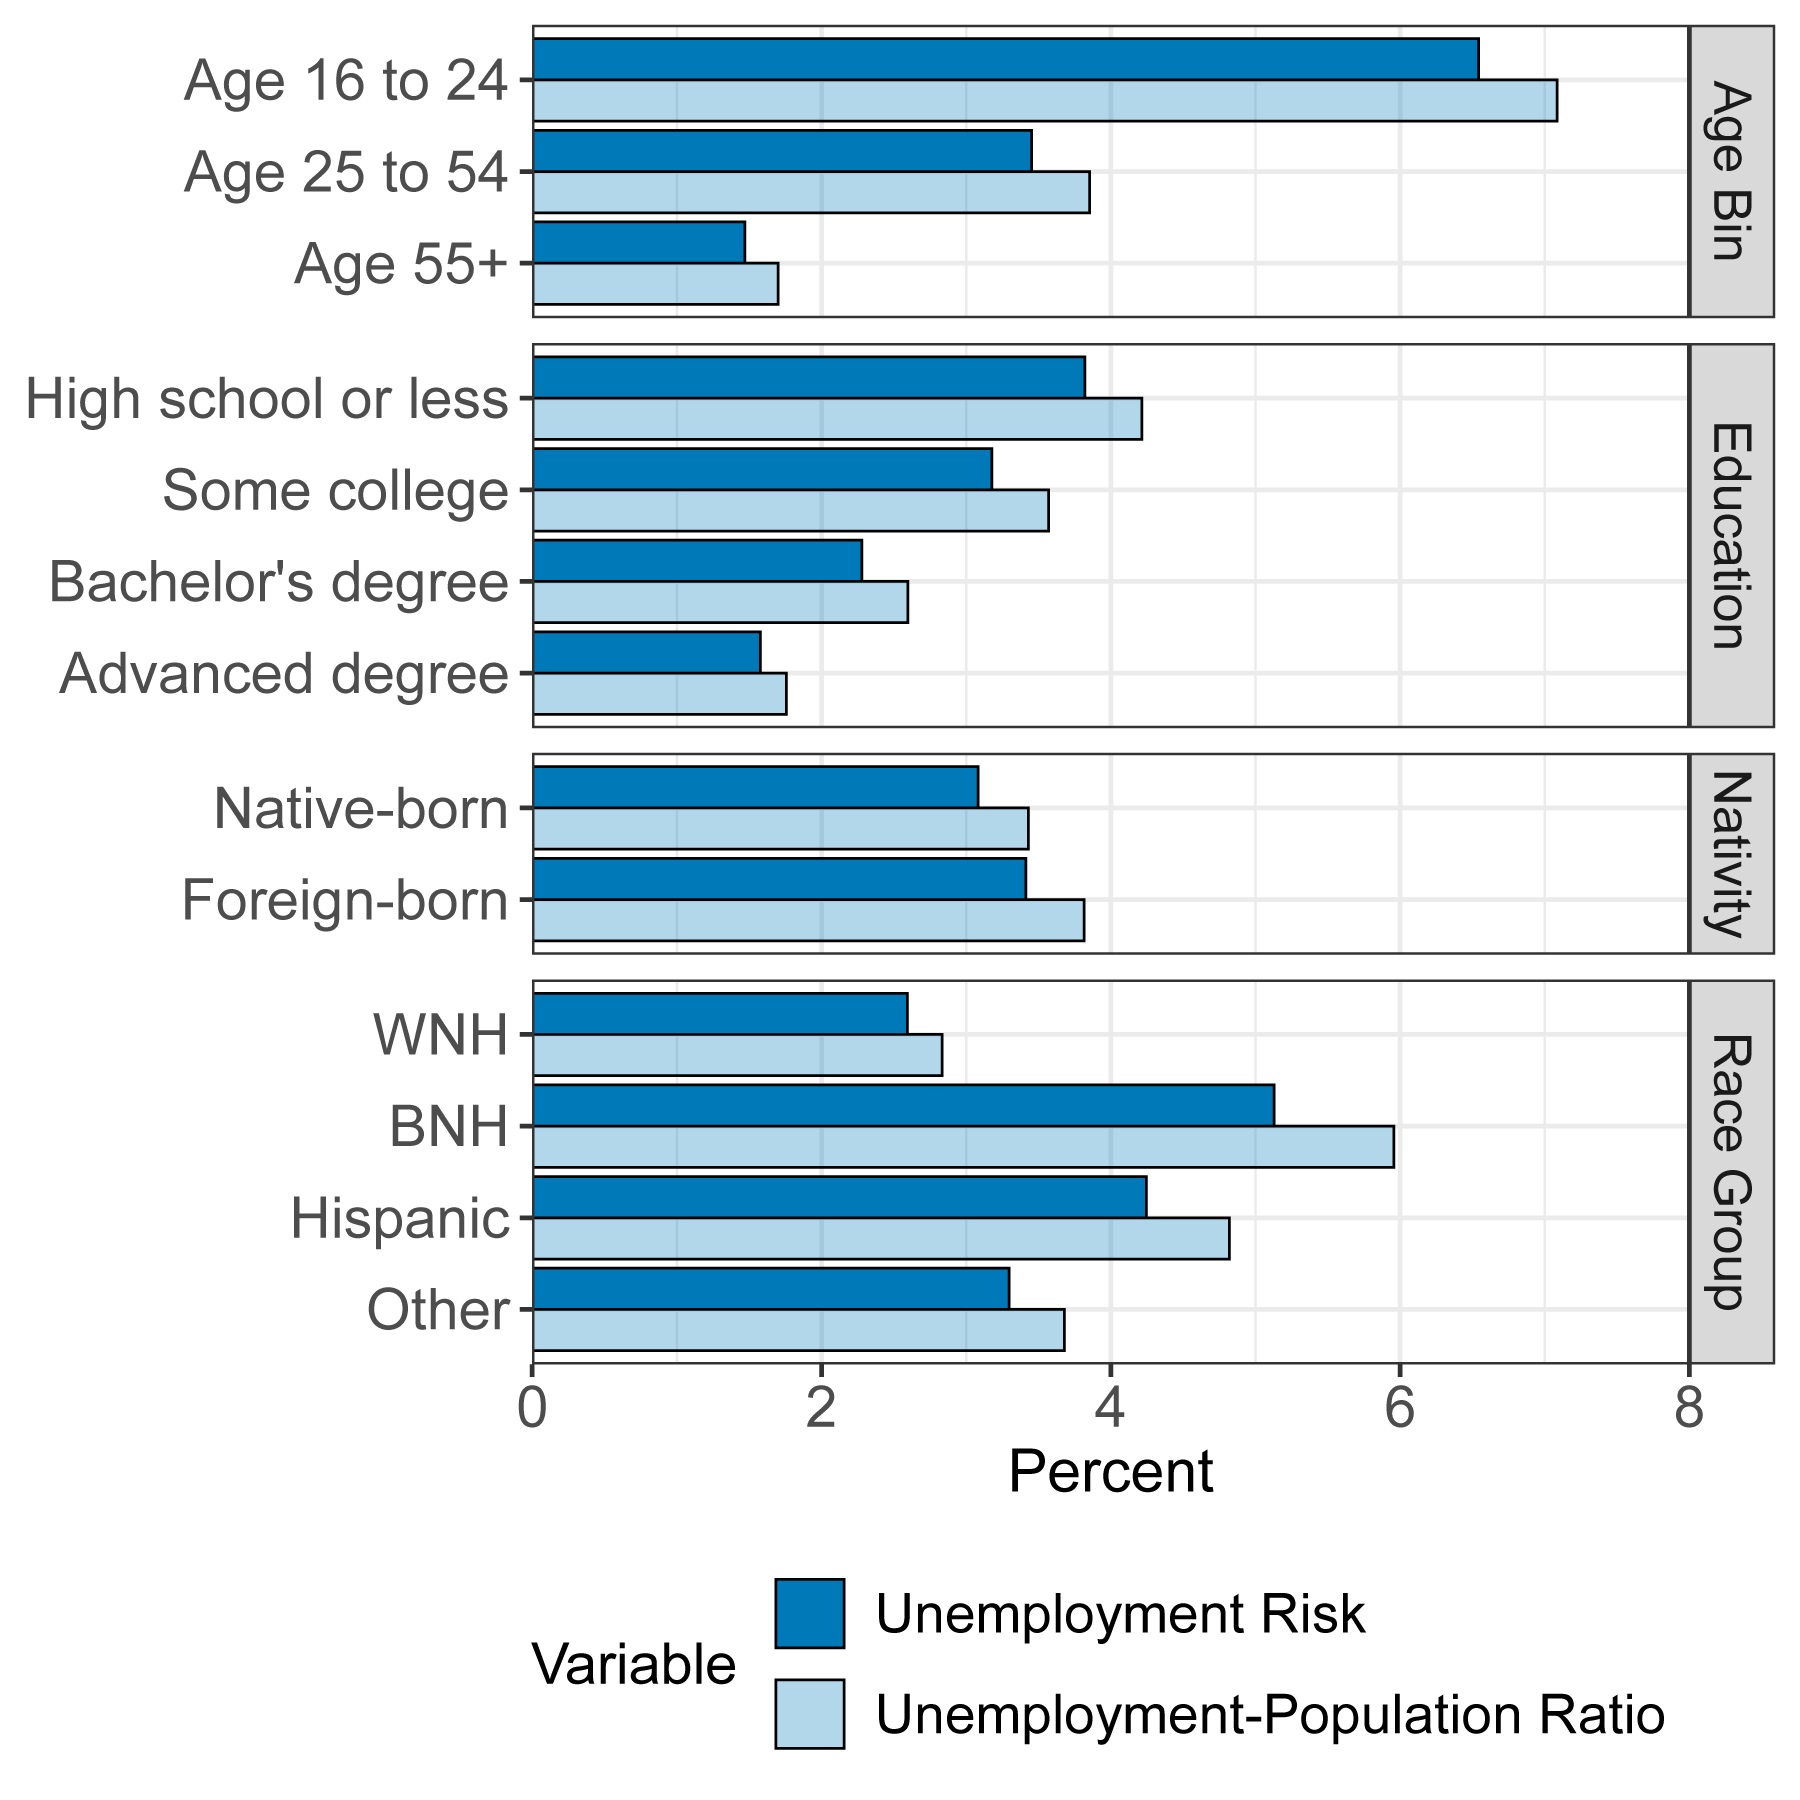 Figure 1. Unemployment risk across demographic groups. See accessible link for data.